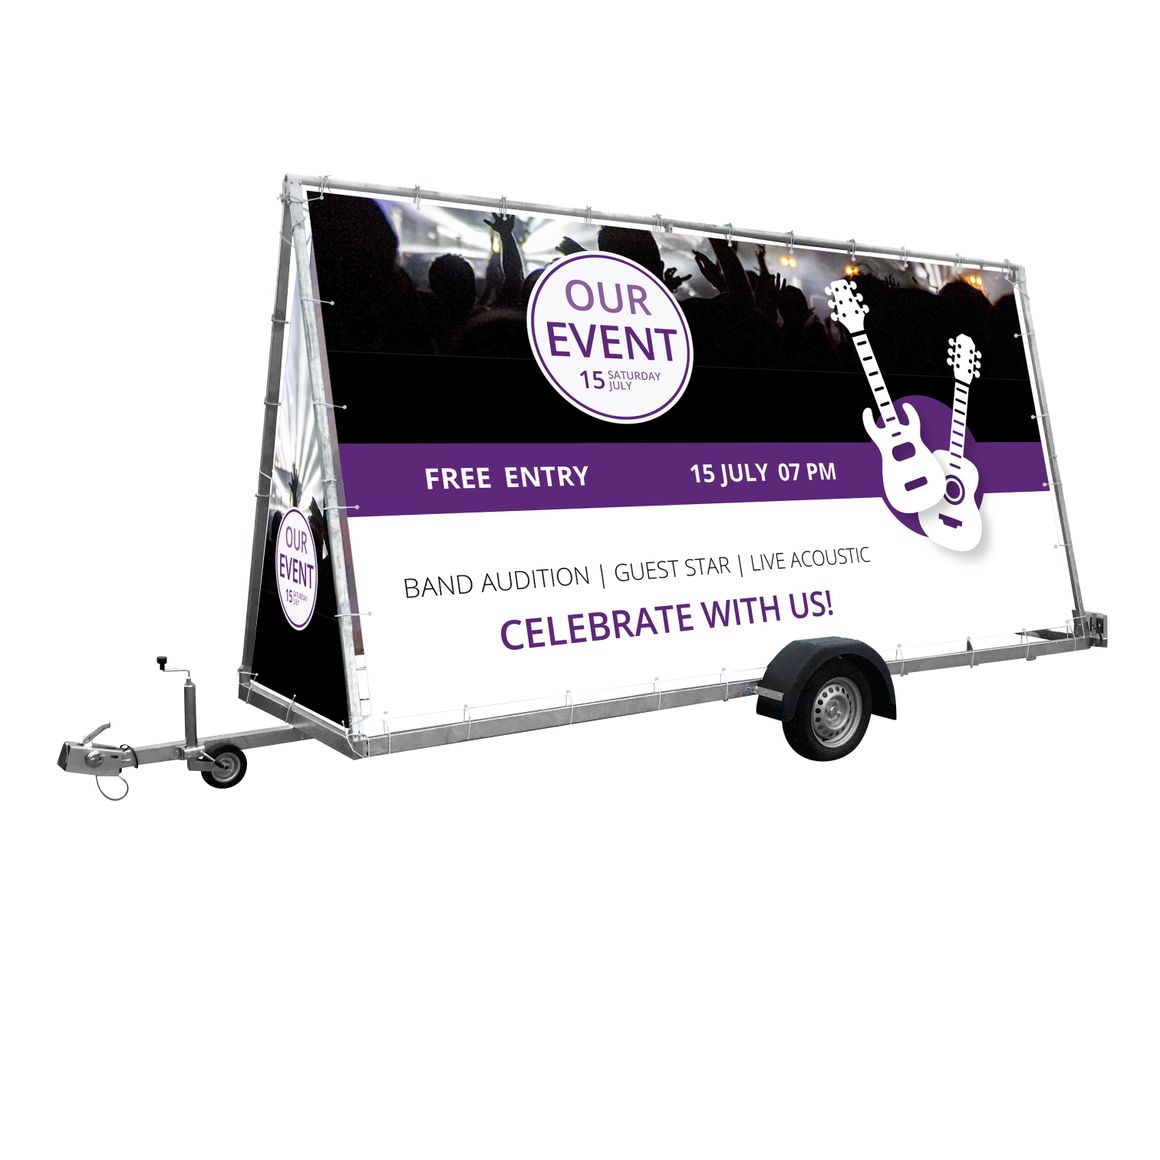 advertising trailer promoting a music event